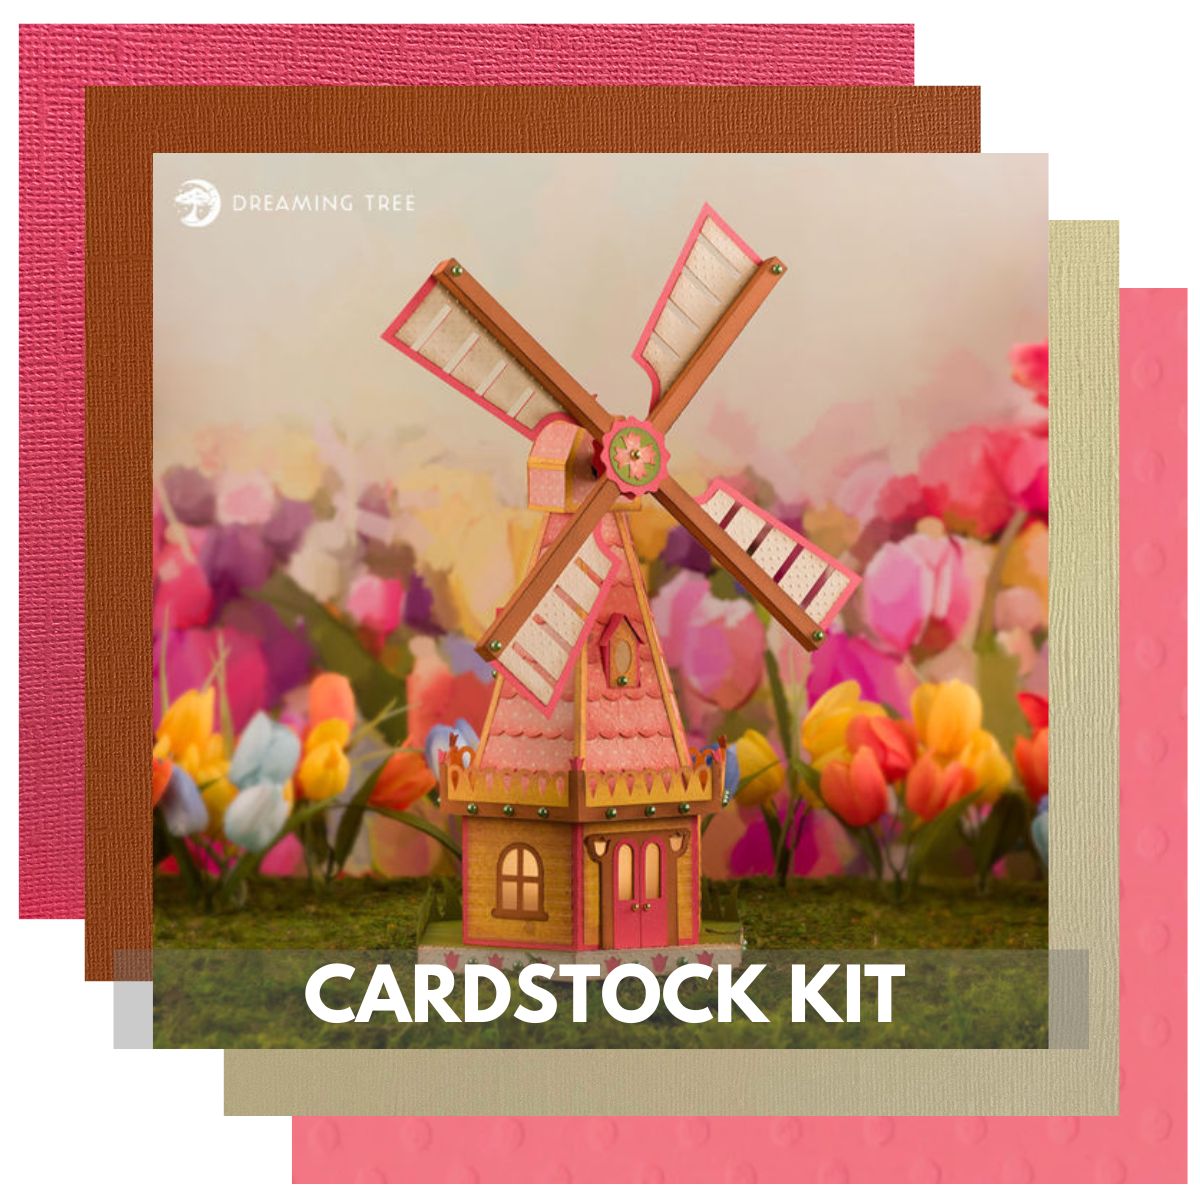 Dimensional Paper Windmill Cardstock Kit Project